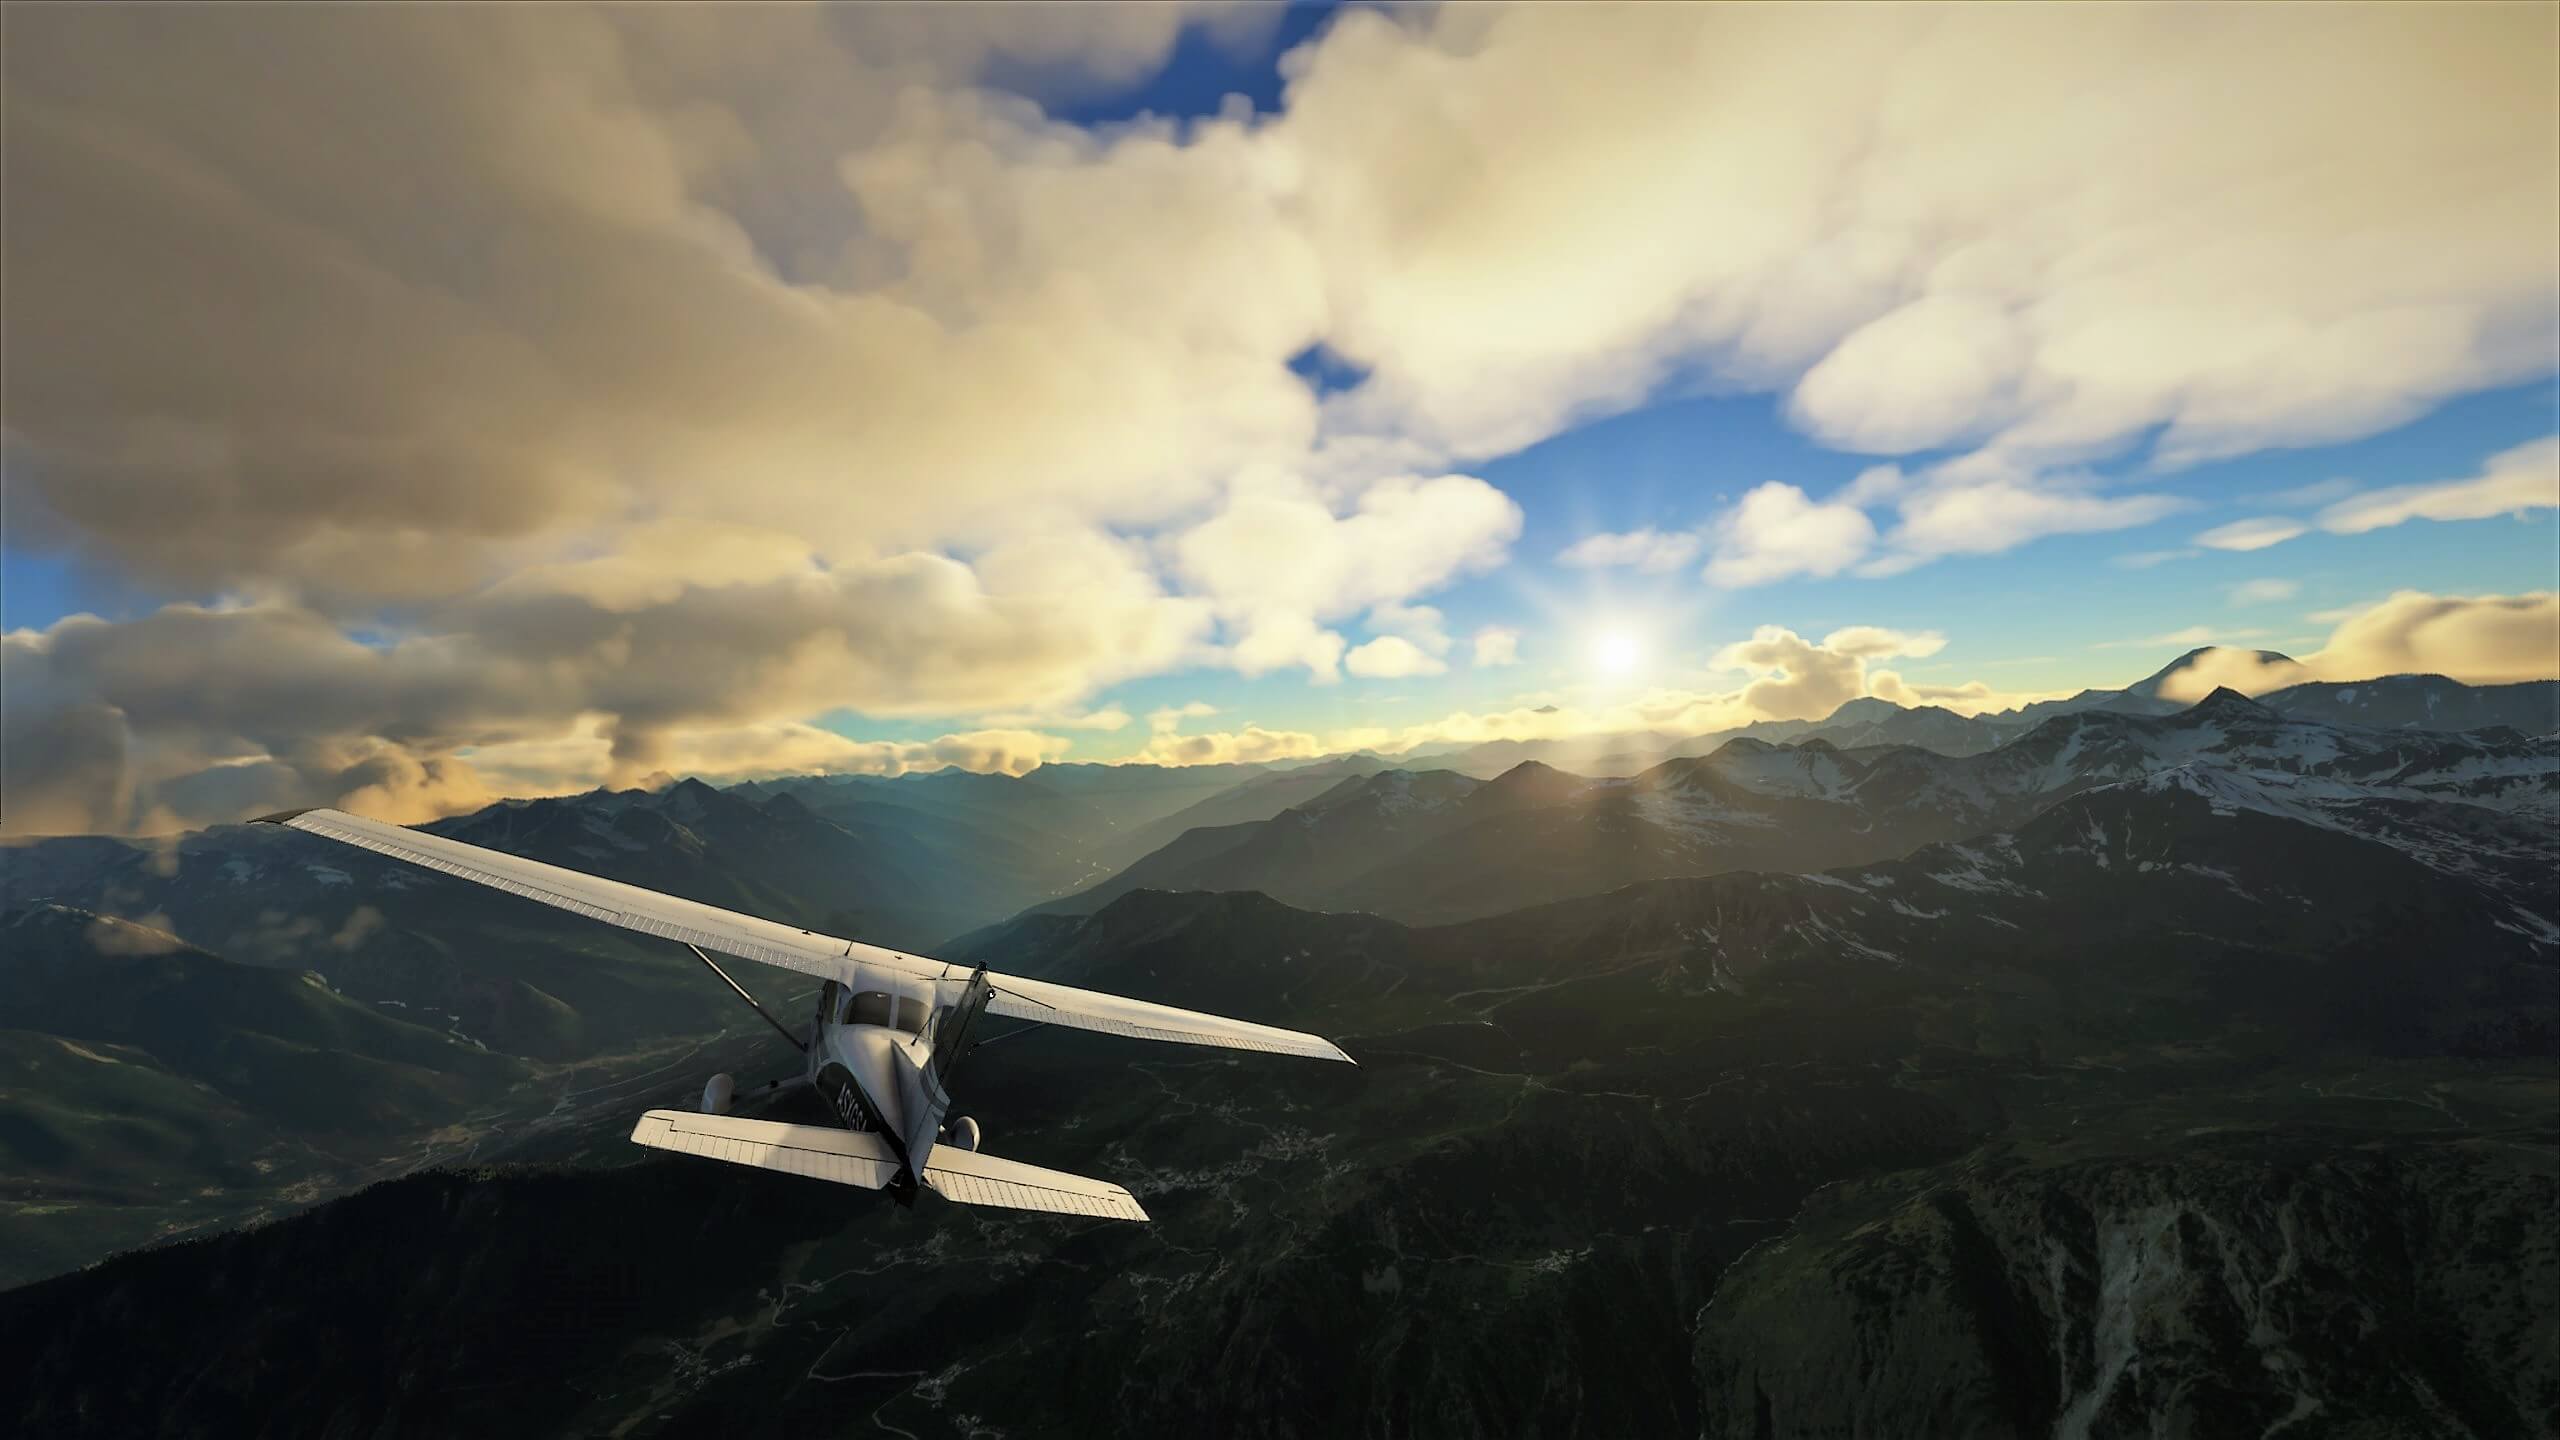 A Highwing Cessna 172 banks right over high terrain, with snow on the mountain peaks. Scattered clouds high above keep visibility clear and the sun can be seen shining brightly up ahead.